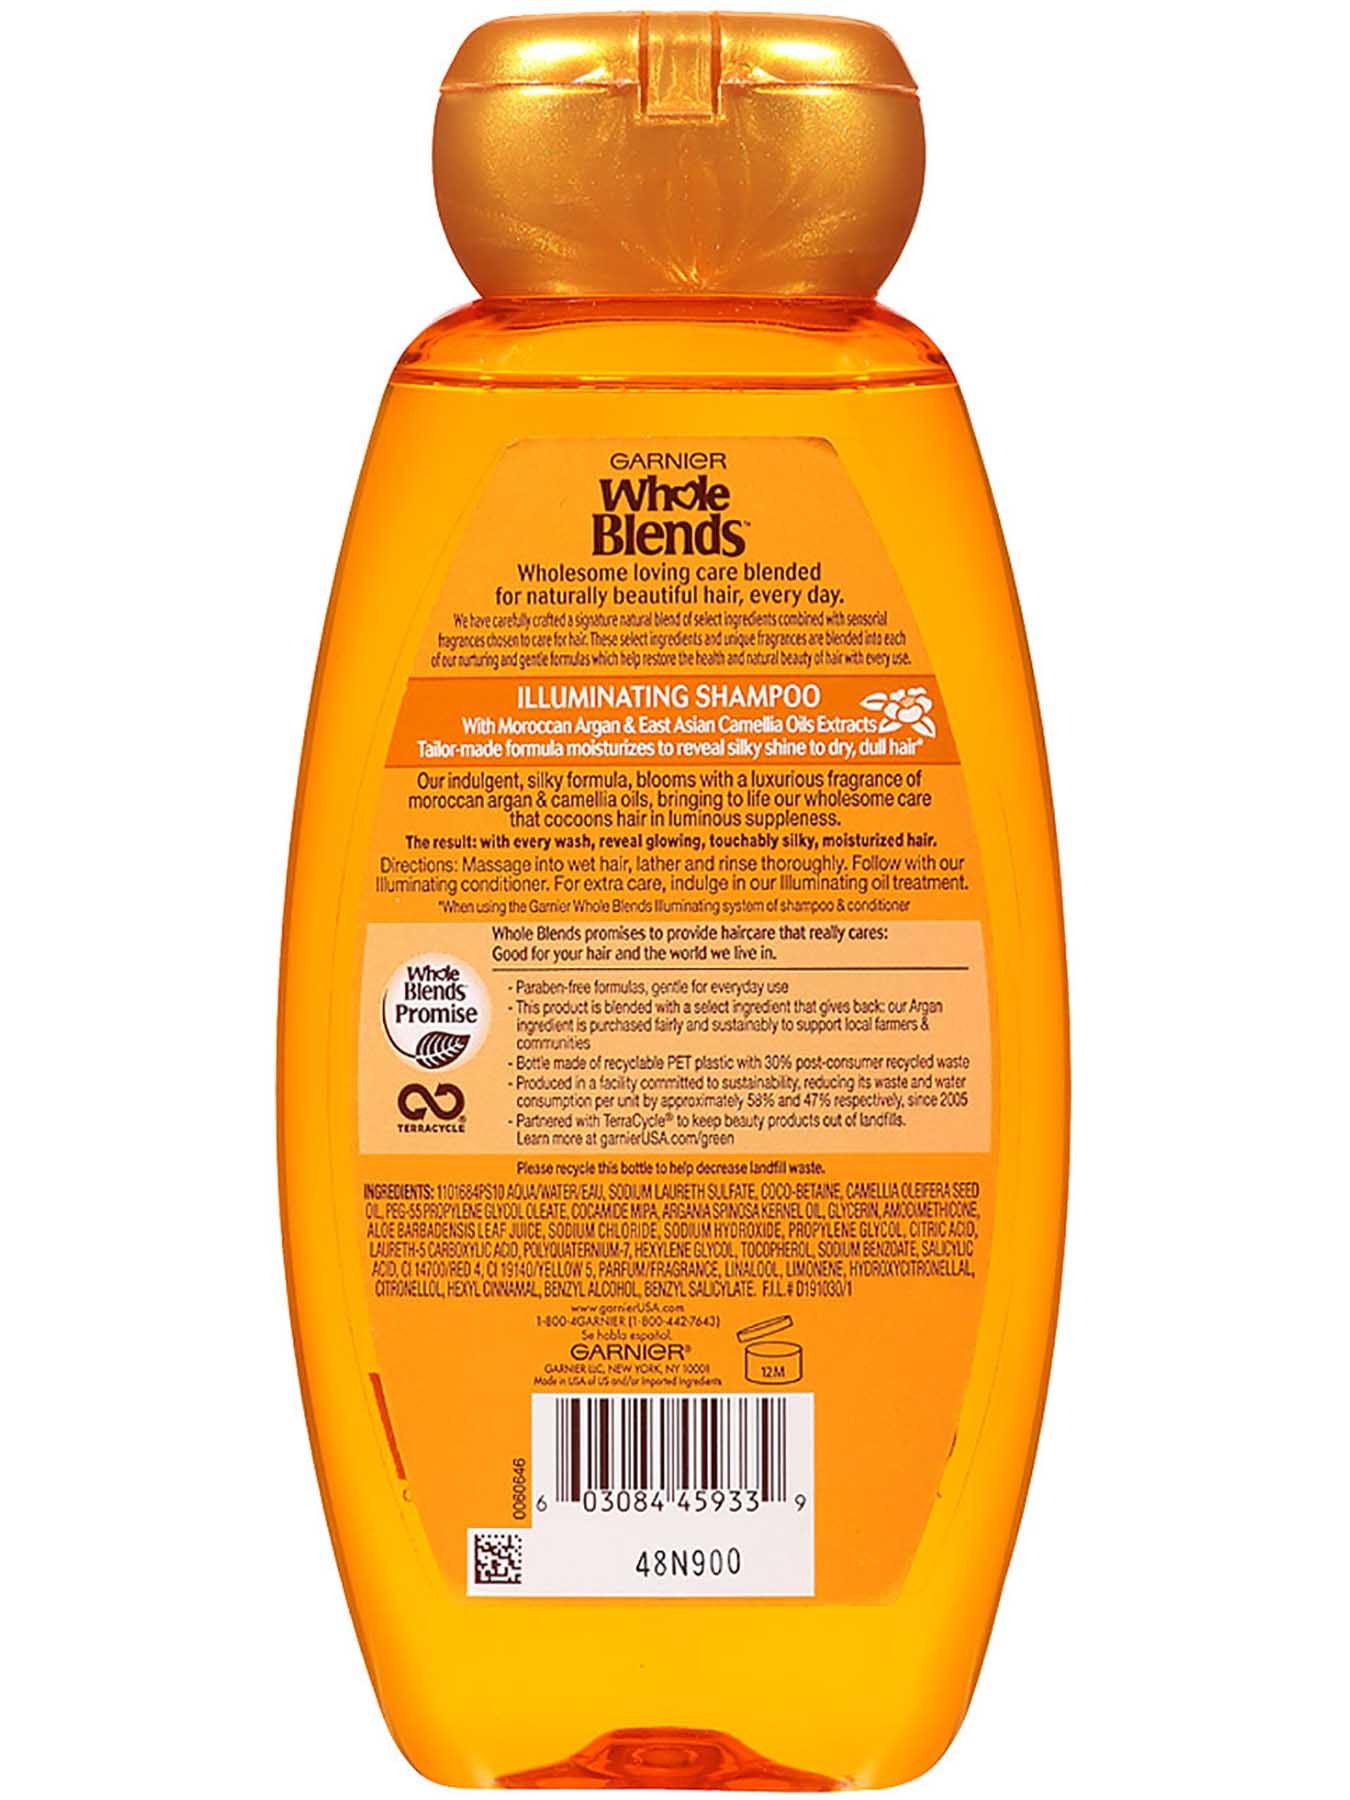 Back view of Illuminating Shampoo with Moroccan, Argan, and Camellia Oils Extracts.